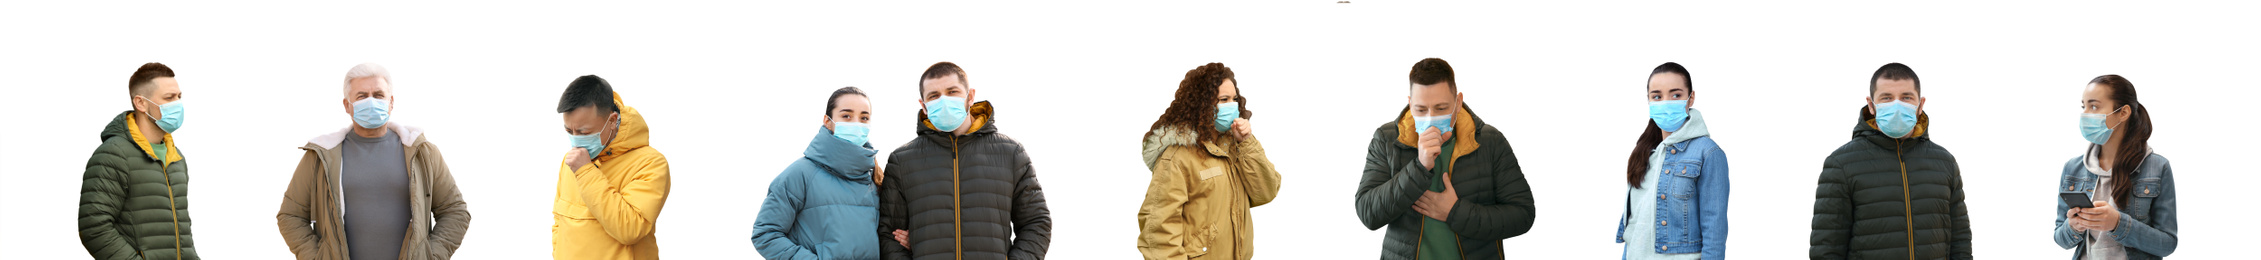 Collage of people wearing medical face masks on white background. Banner design